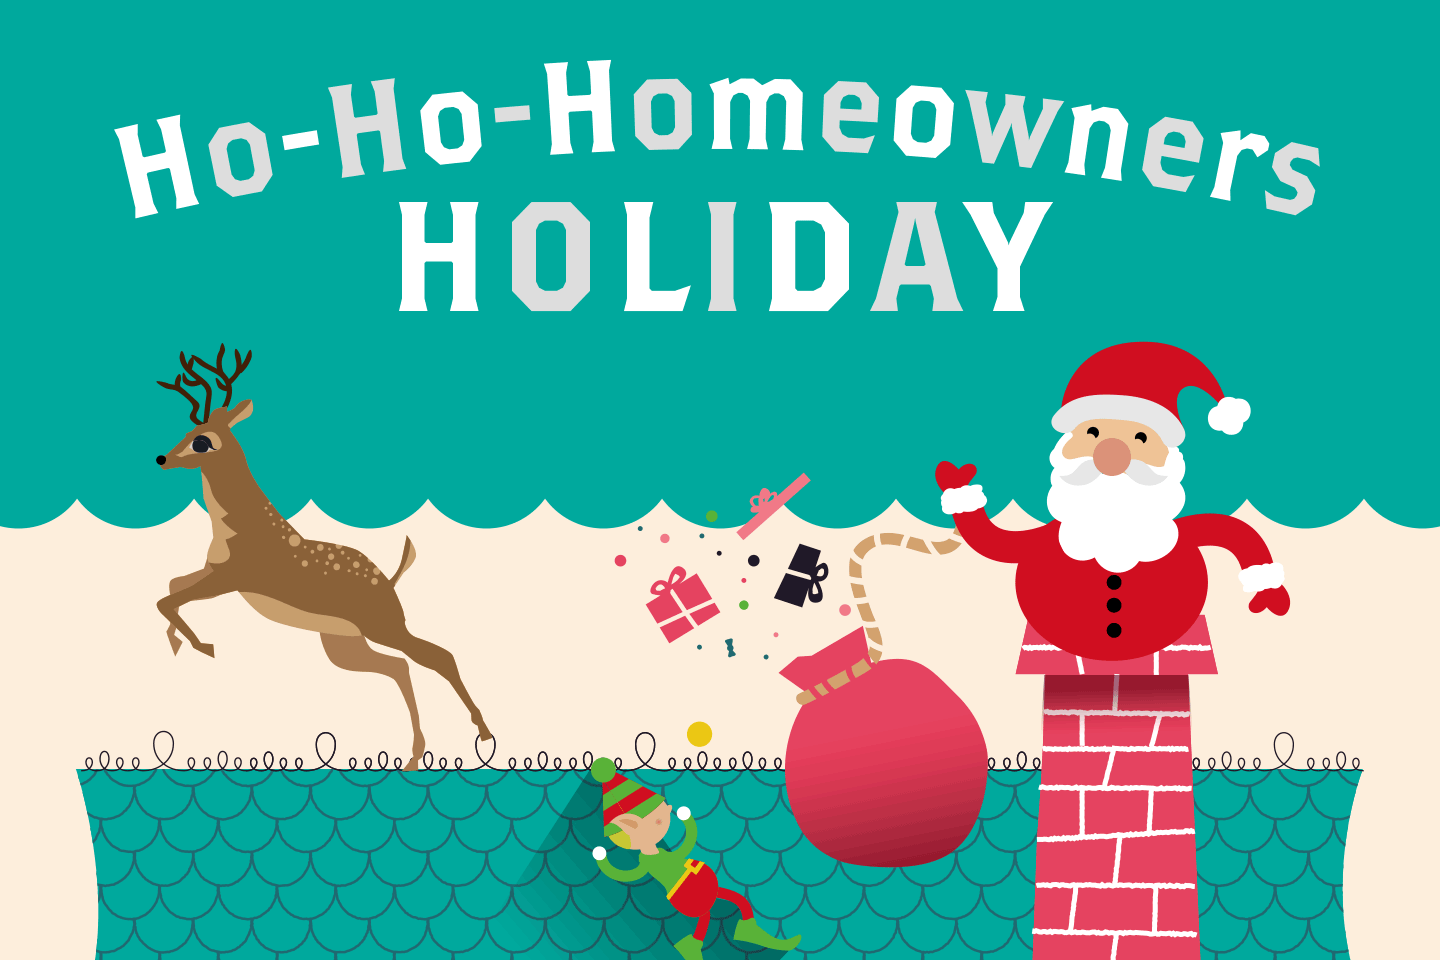 Homeowners holiday graphic with Santa on roof of house